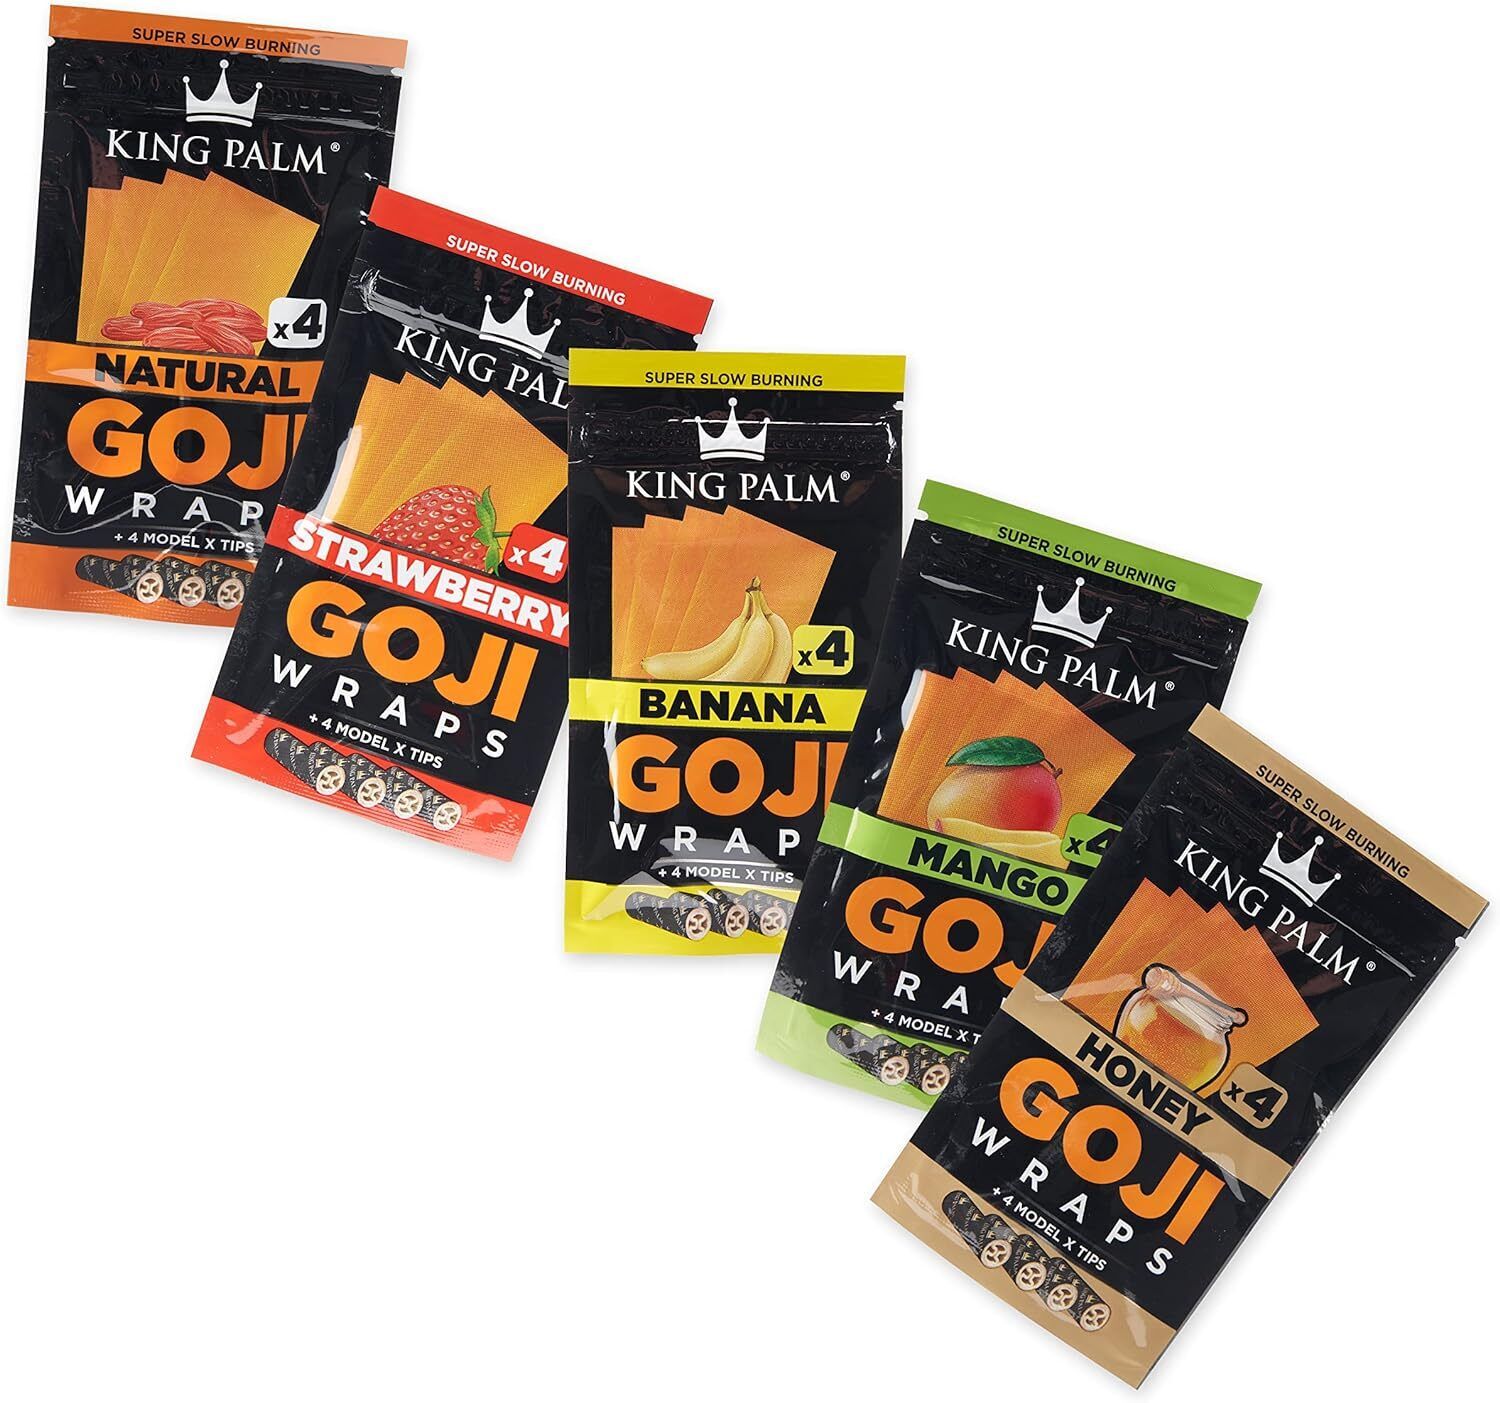 King Palm | Goji Berry Mixed Wraps & Tips | 4 Wraps + 4 Tips Per Pack, 5 Pack